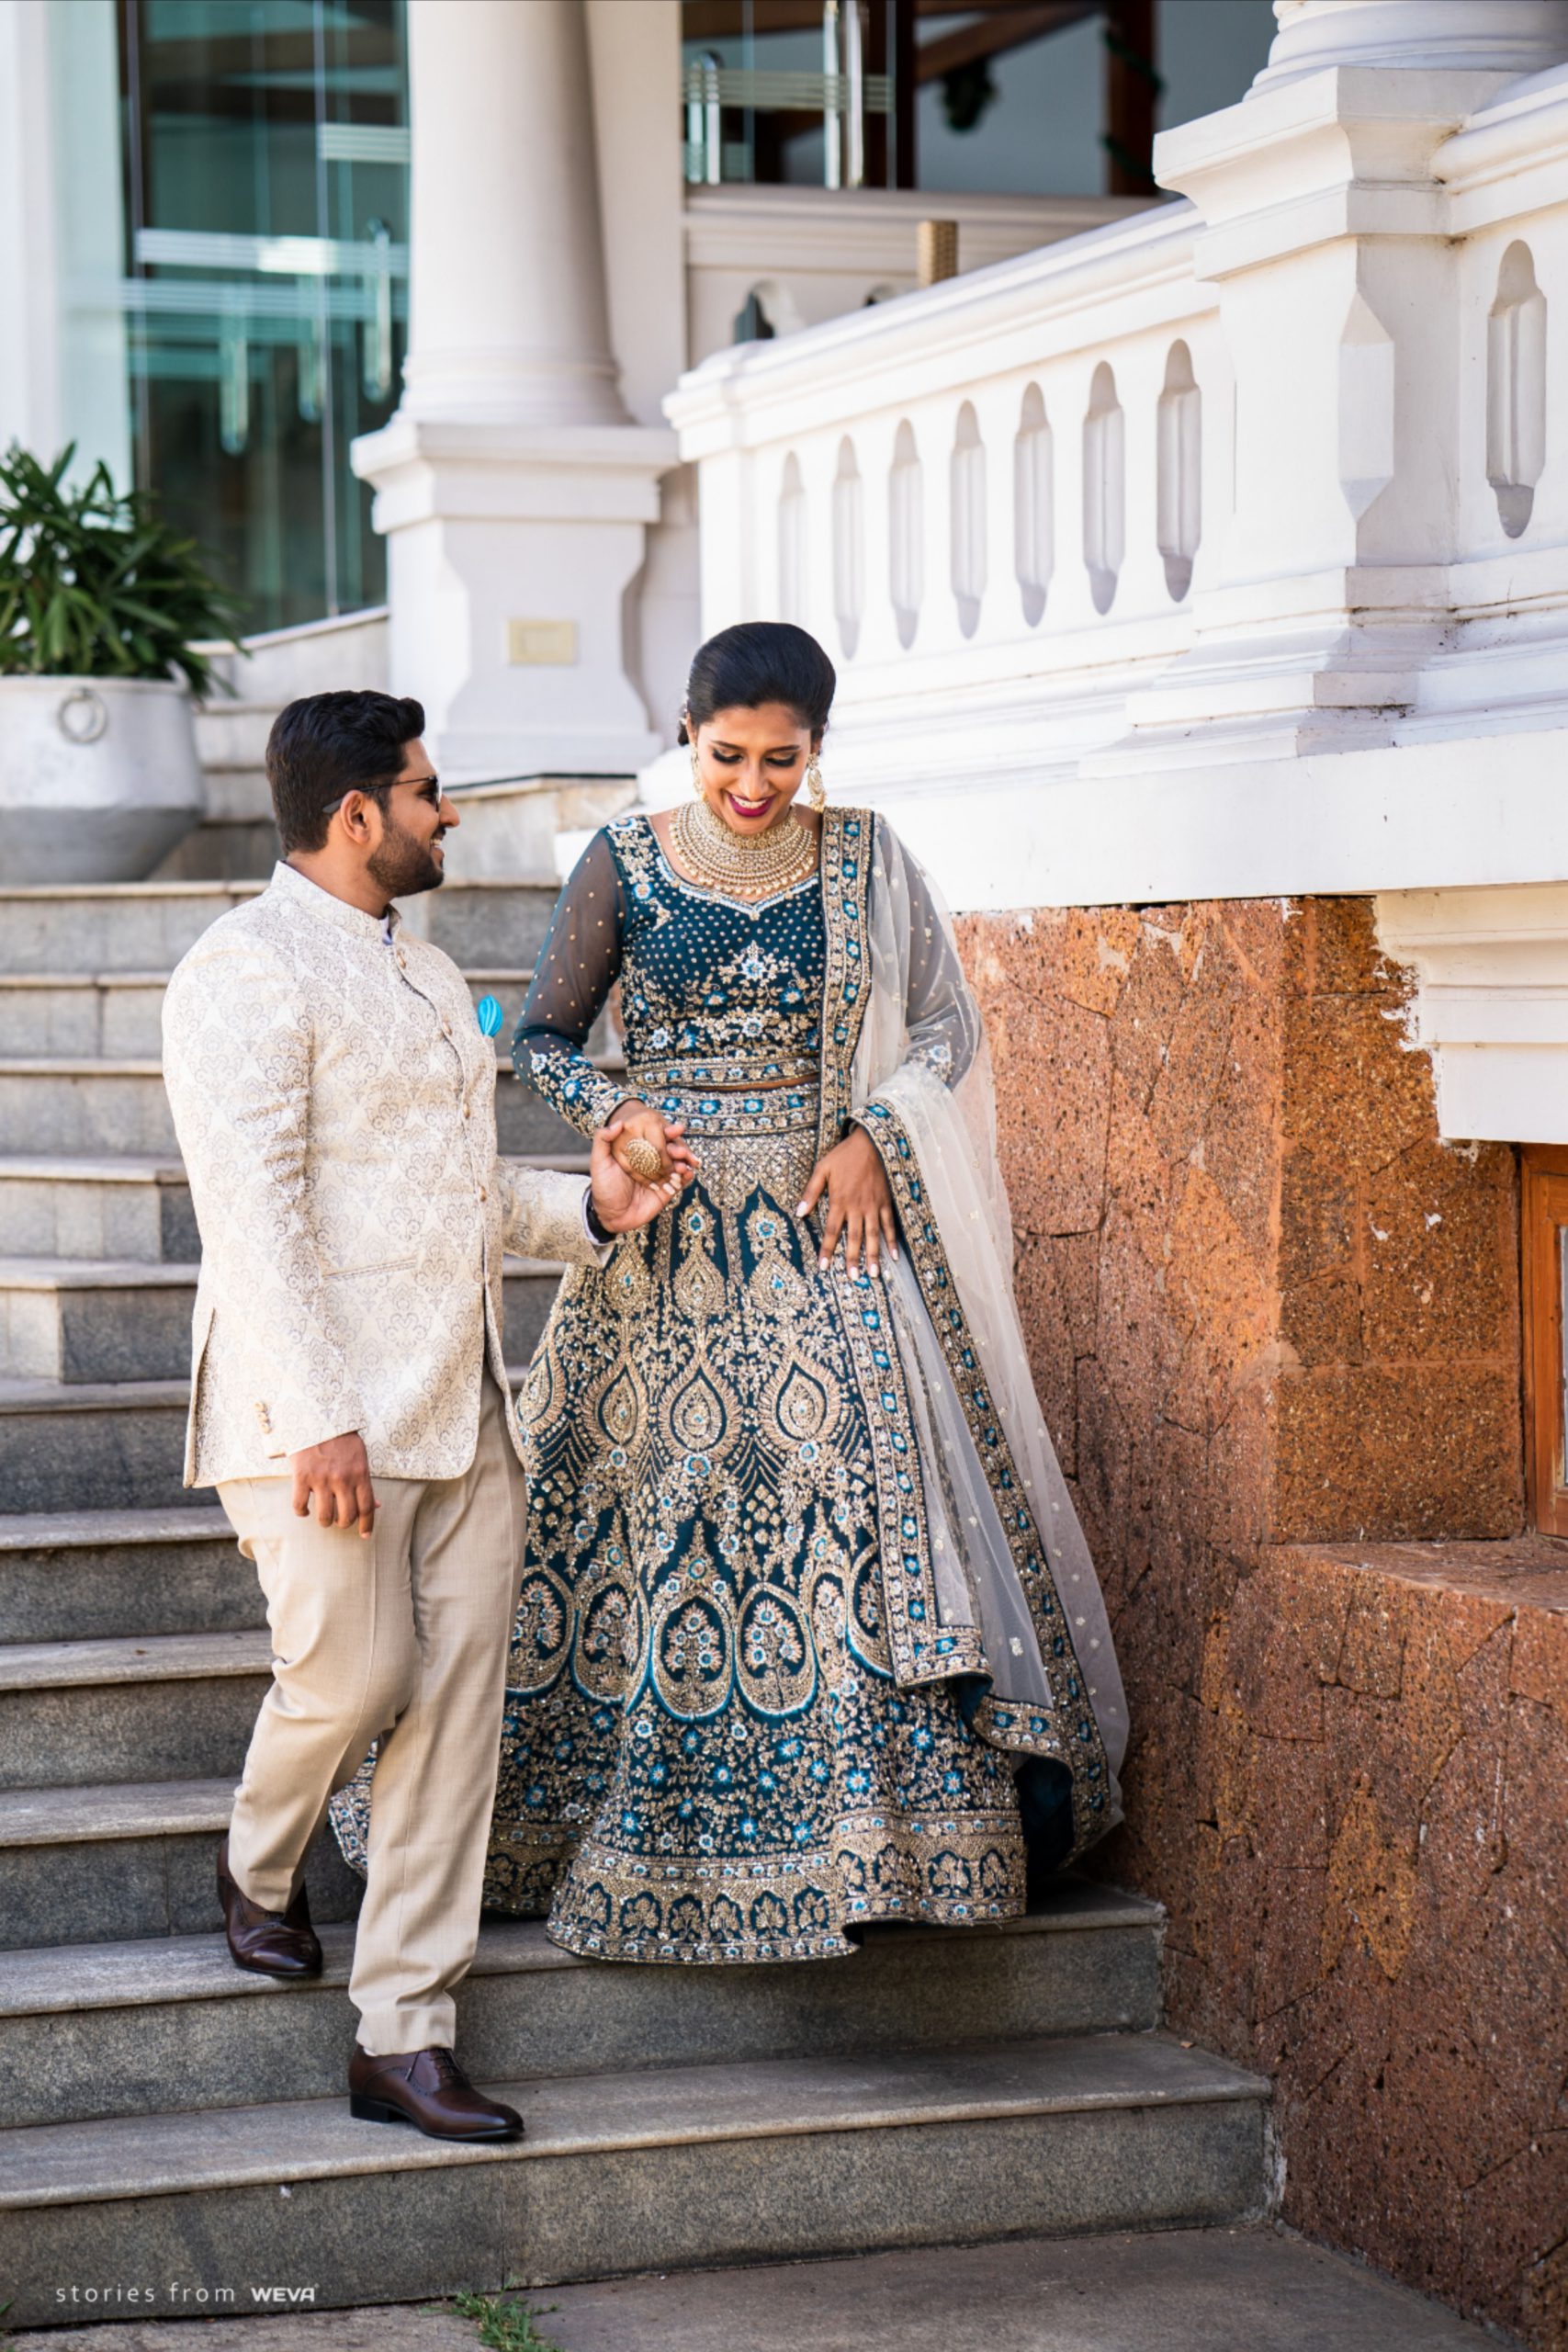 Red Veds: Best Traditional Wedding Couple Poses | Check It Now